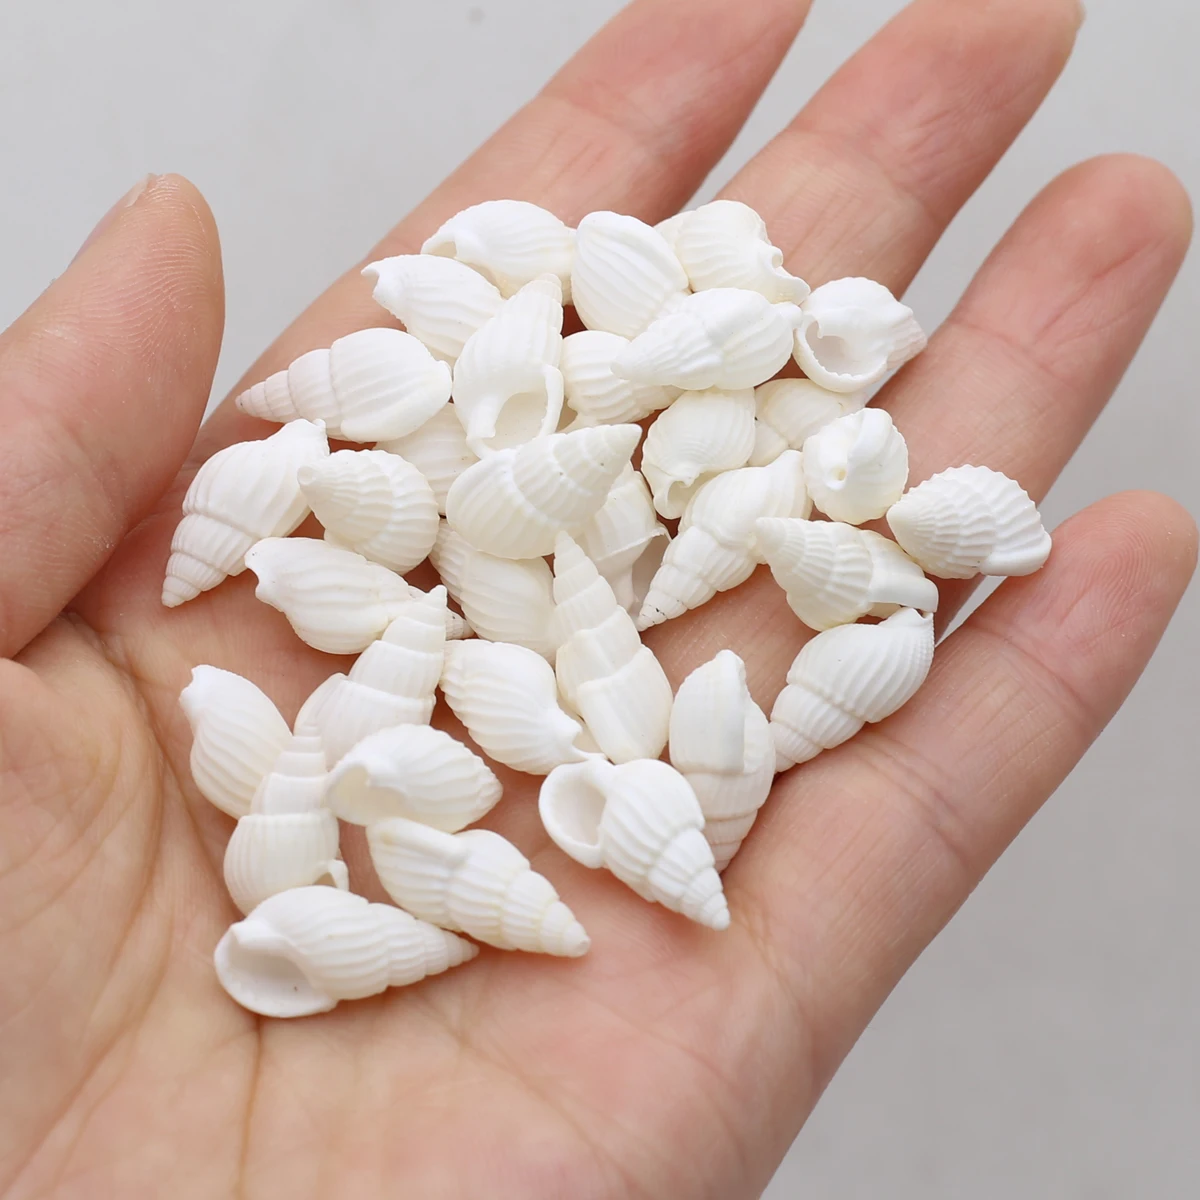 

100G DIY Shell Beads Natural White Conch Shell Bead Without Hole For Jewelry Making DIY Necklace Bracelet Clothes Accessory